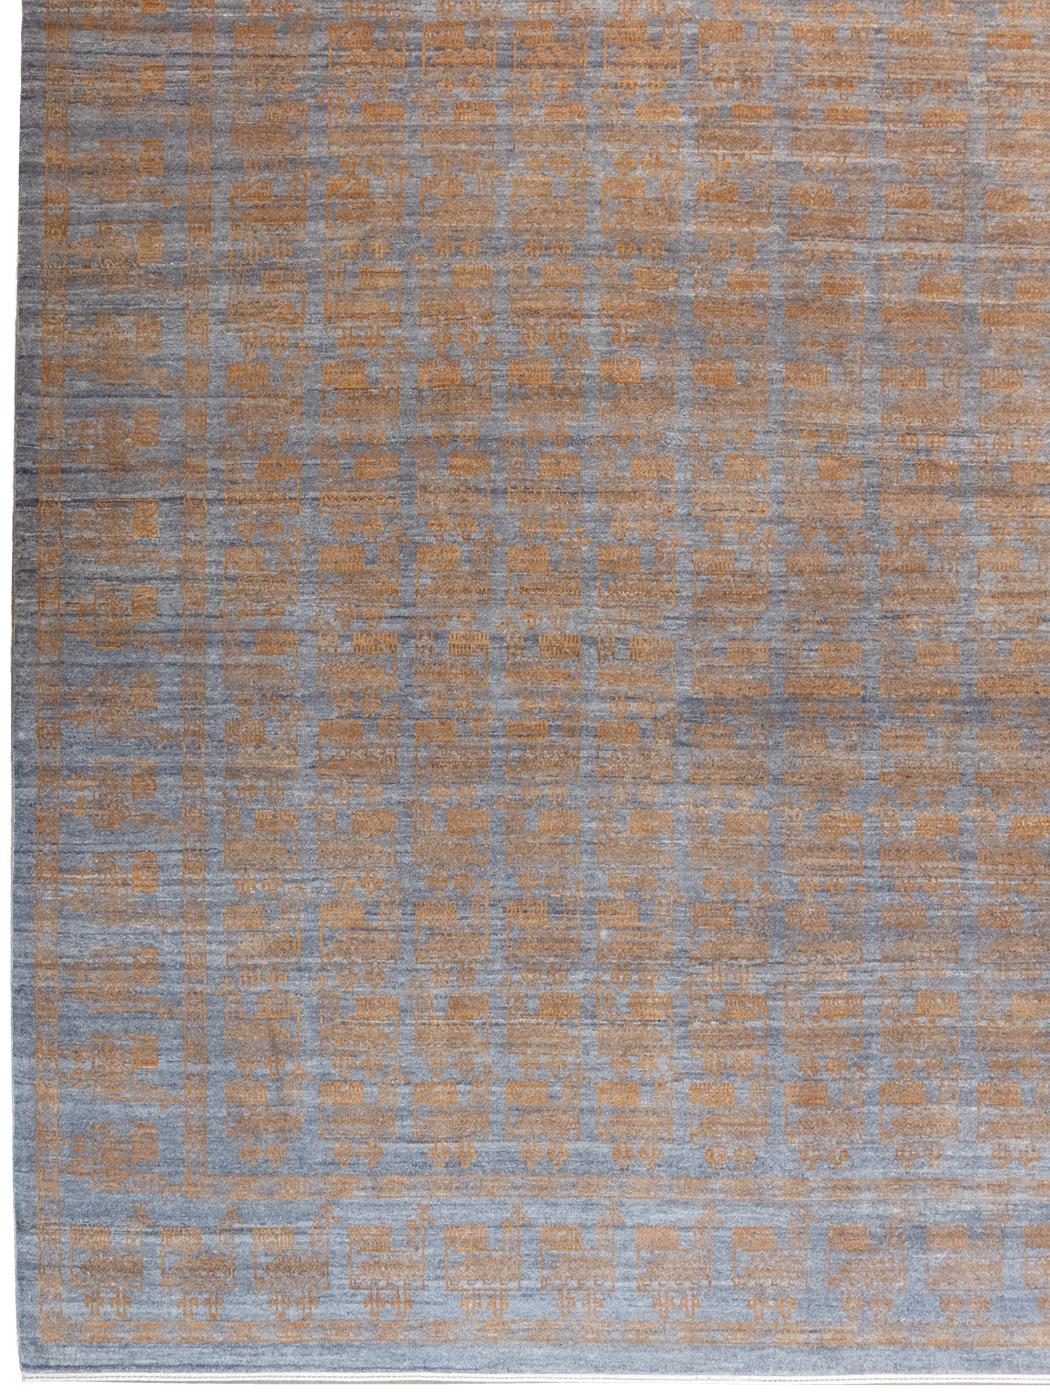 Persian Orley Shabahang, Orange and Gray Modern Peacock Carpet, Wool, 9' x 12' For Sale